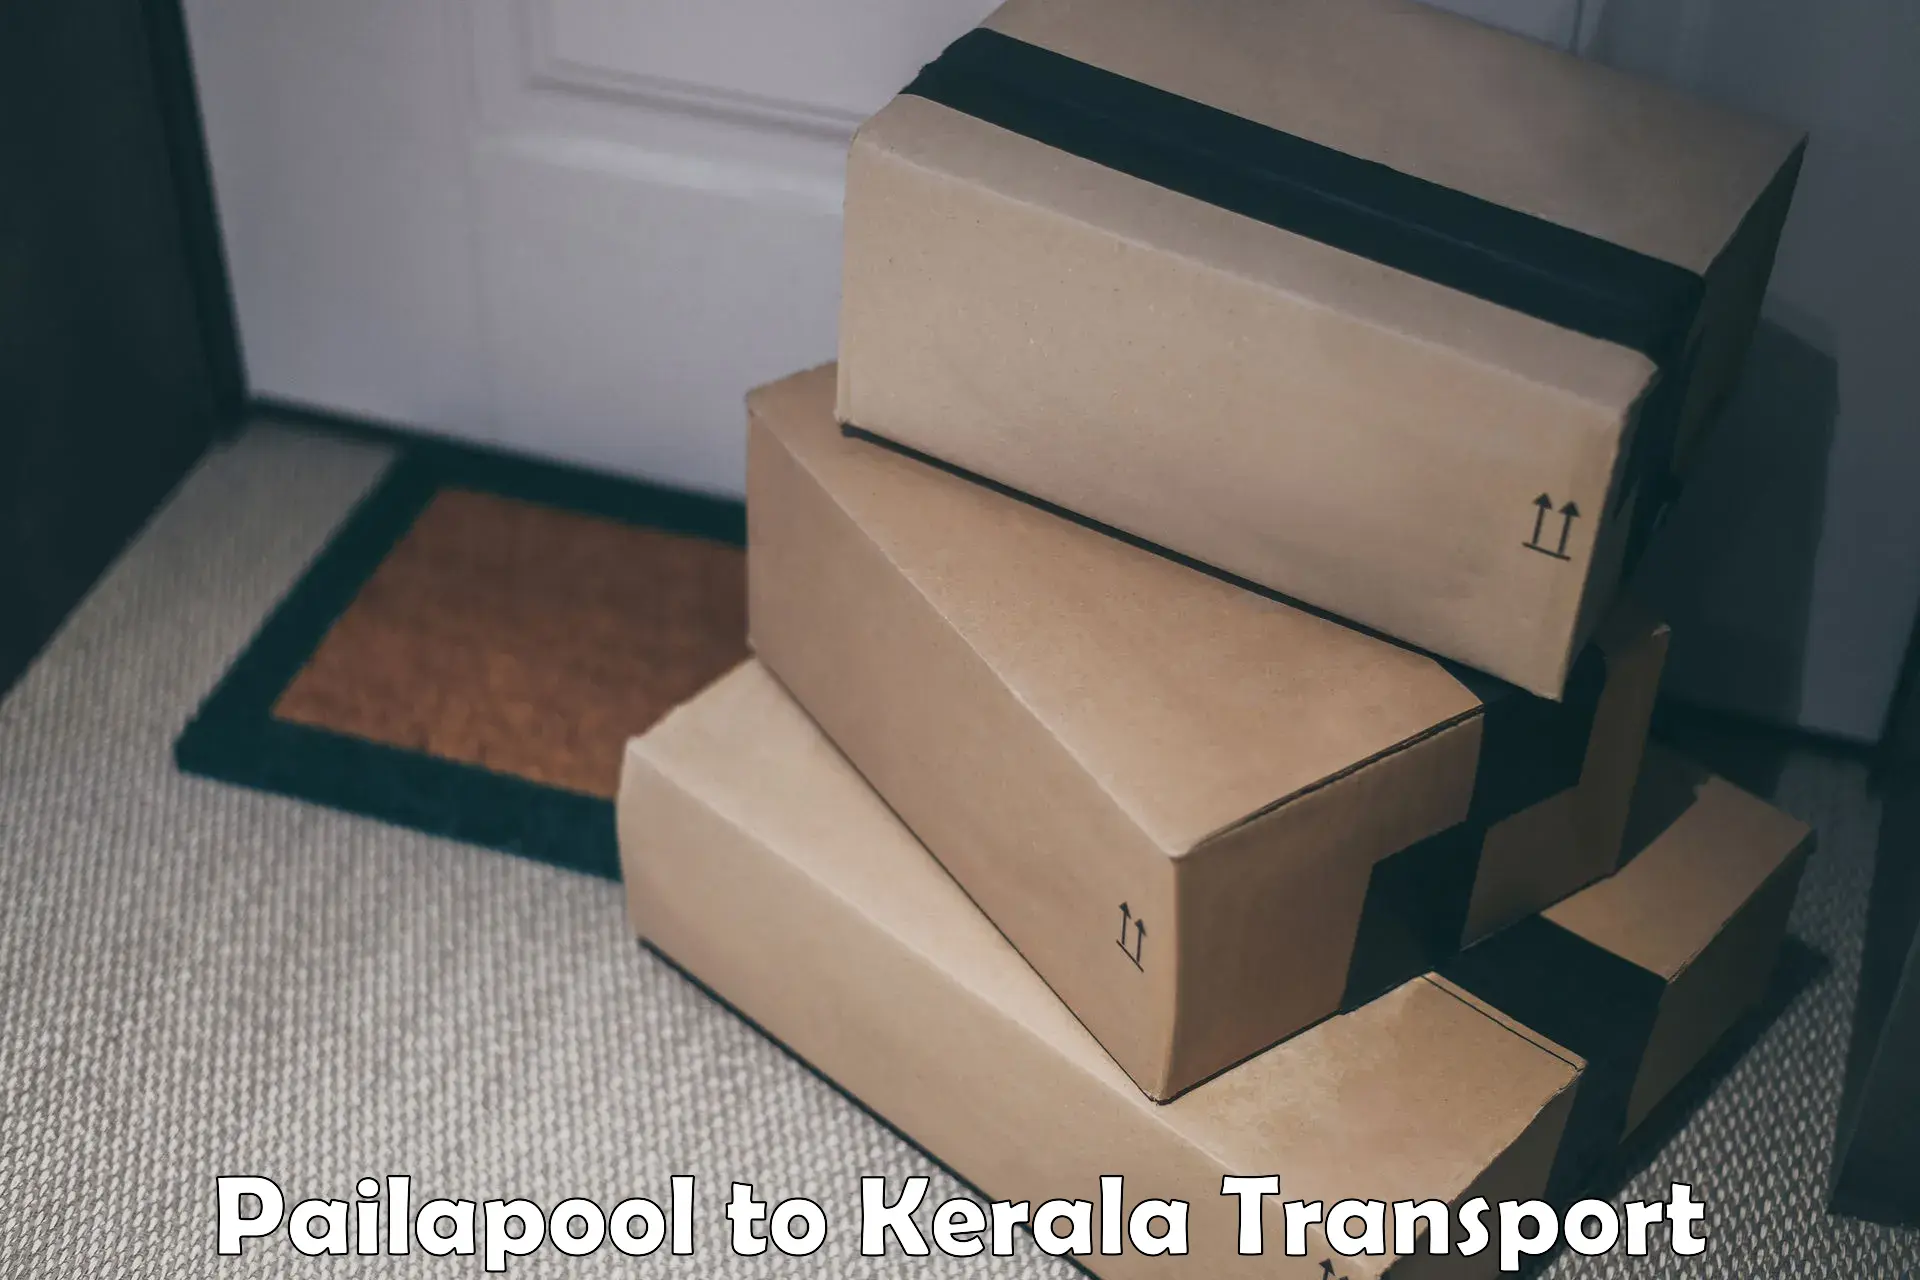 Part load transport service in India Pailapool to Kerala